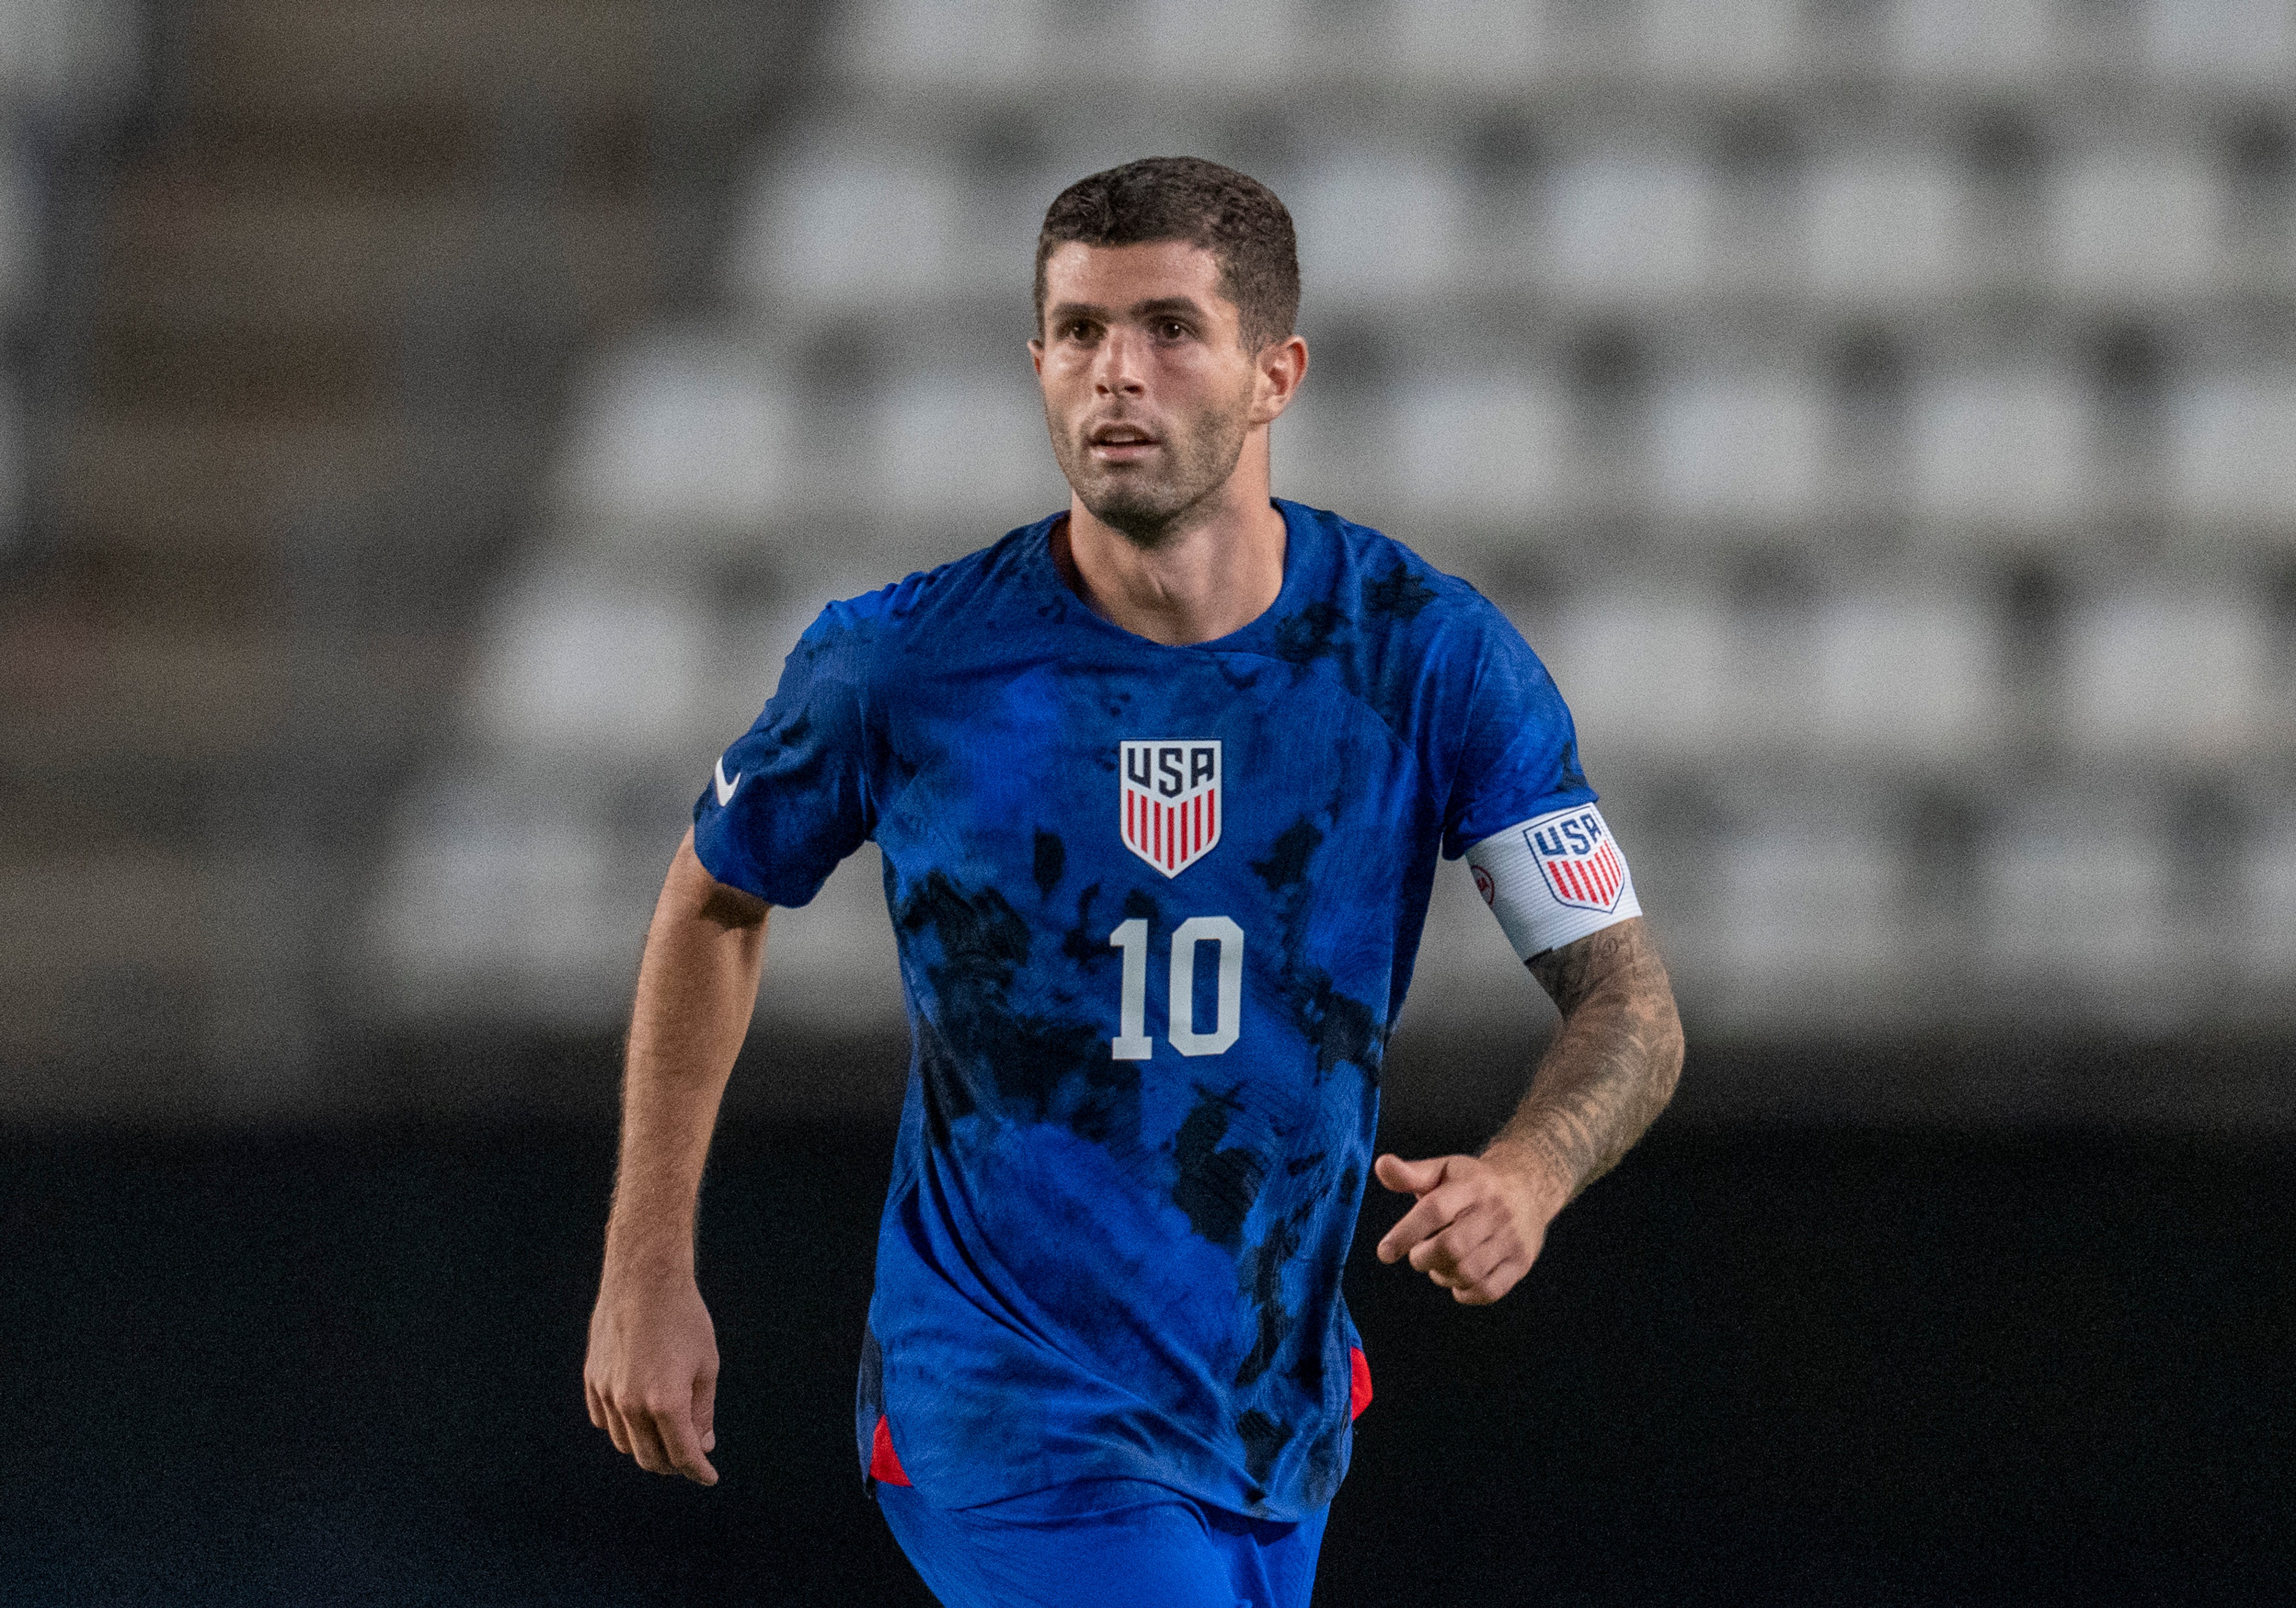 Christian Pulisic #10 of the United States sprints during a game between Saudi Arabia and USMNT at Estadio Nueva Condomina on September 27, 2022 in Murcia, Spain (Brad Smith—ISI Photos/Getty Images)